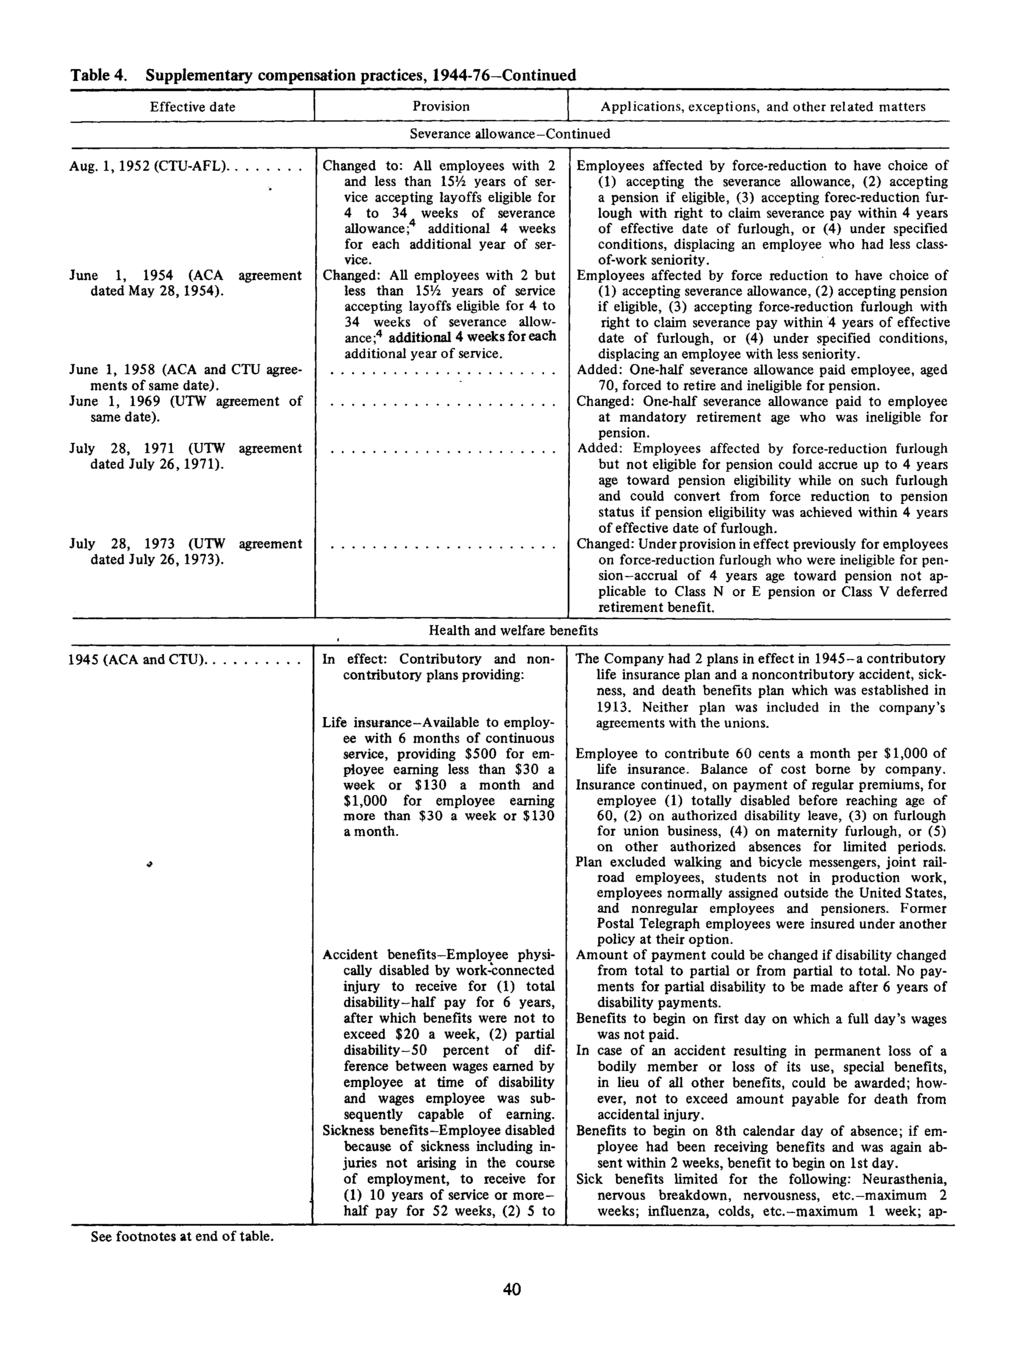 Table 4. Supplementary compensation practices, 1944-76 Continued Effective date Provision Applications, exceptions, and other related matters Severance allow ance-c oritinued Aug. 1,1 9 5 2 (CTU-AFL).